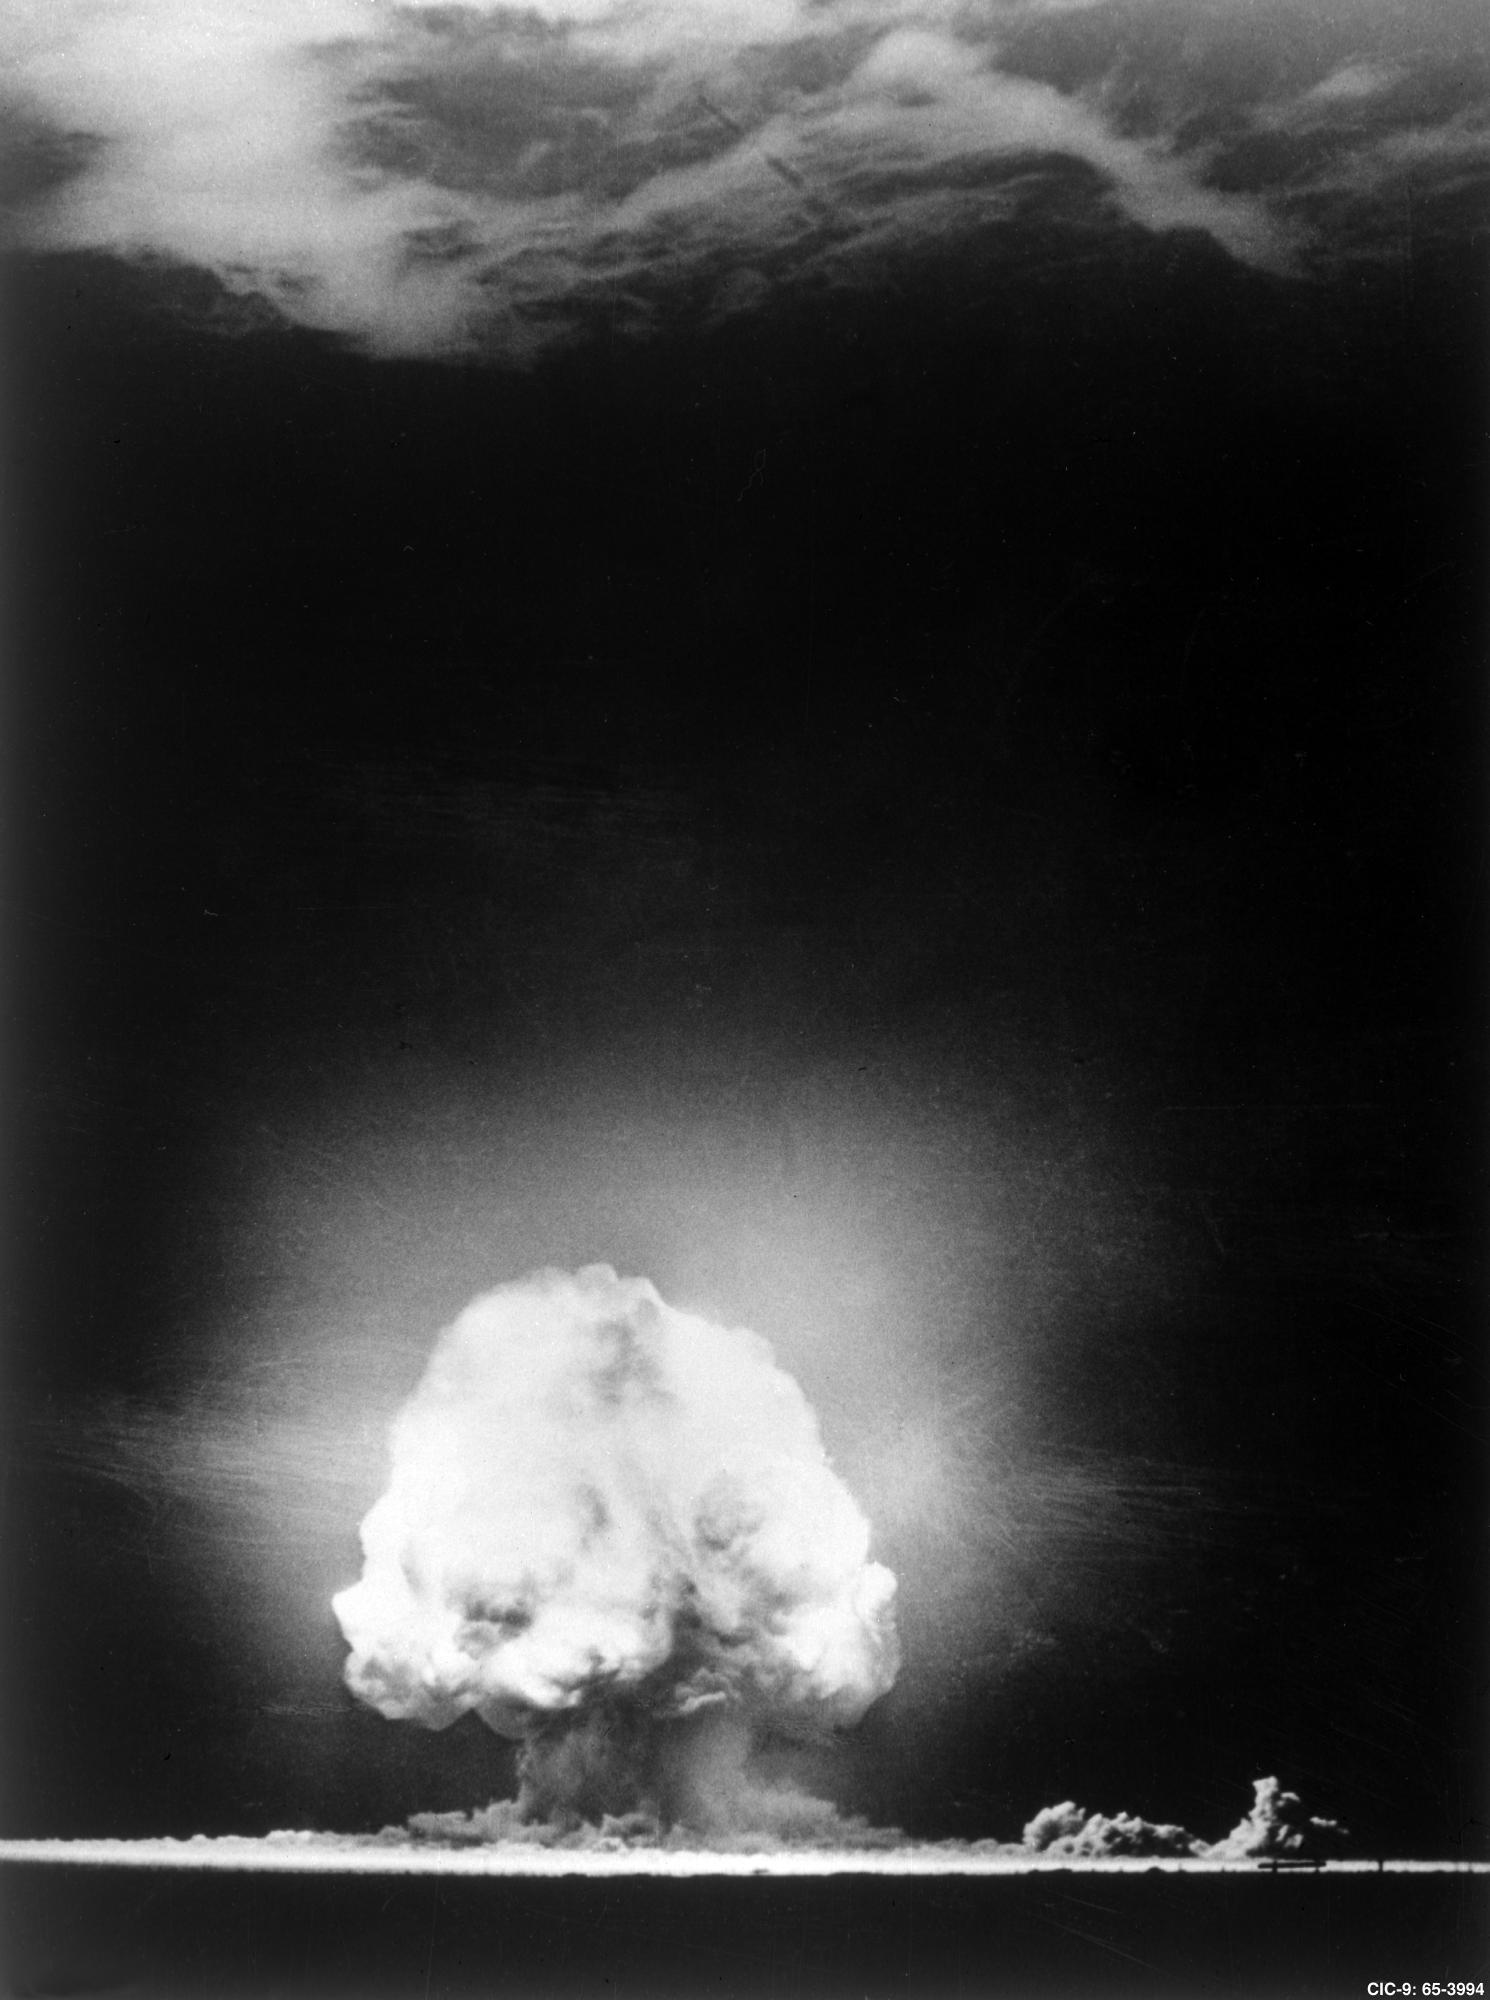 a black and white image of a mushroom cloud of a nuclear bomb test